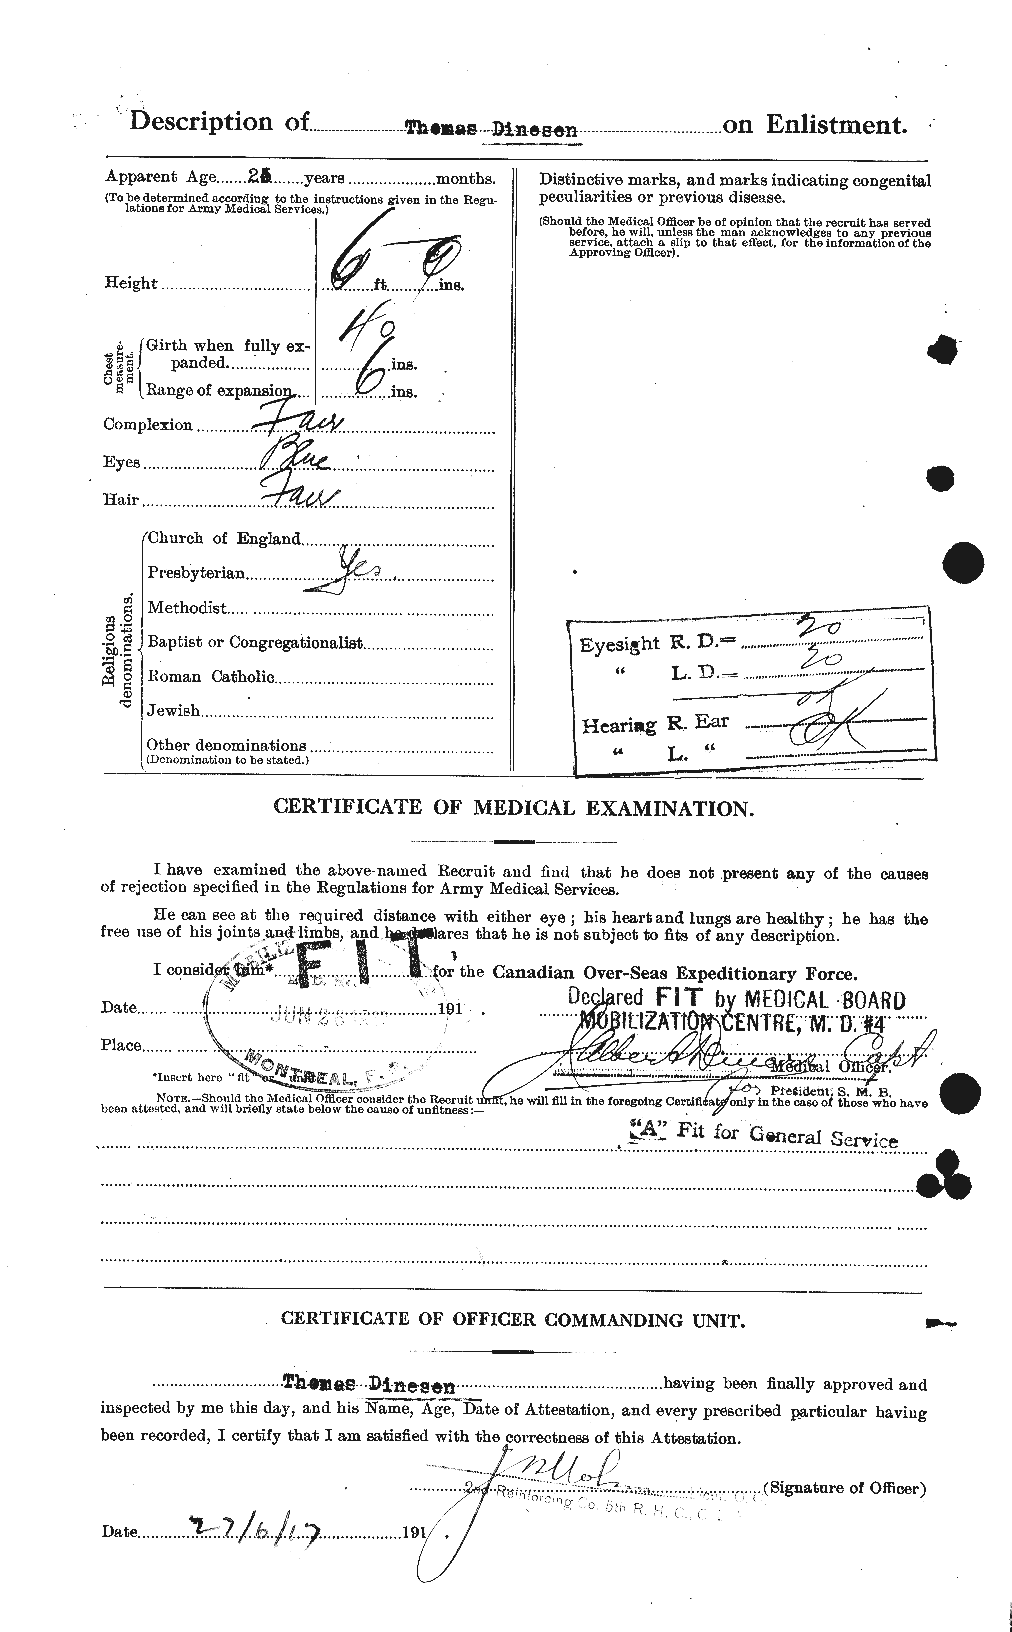 Personnel Records of the First World War - CEF 295235b